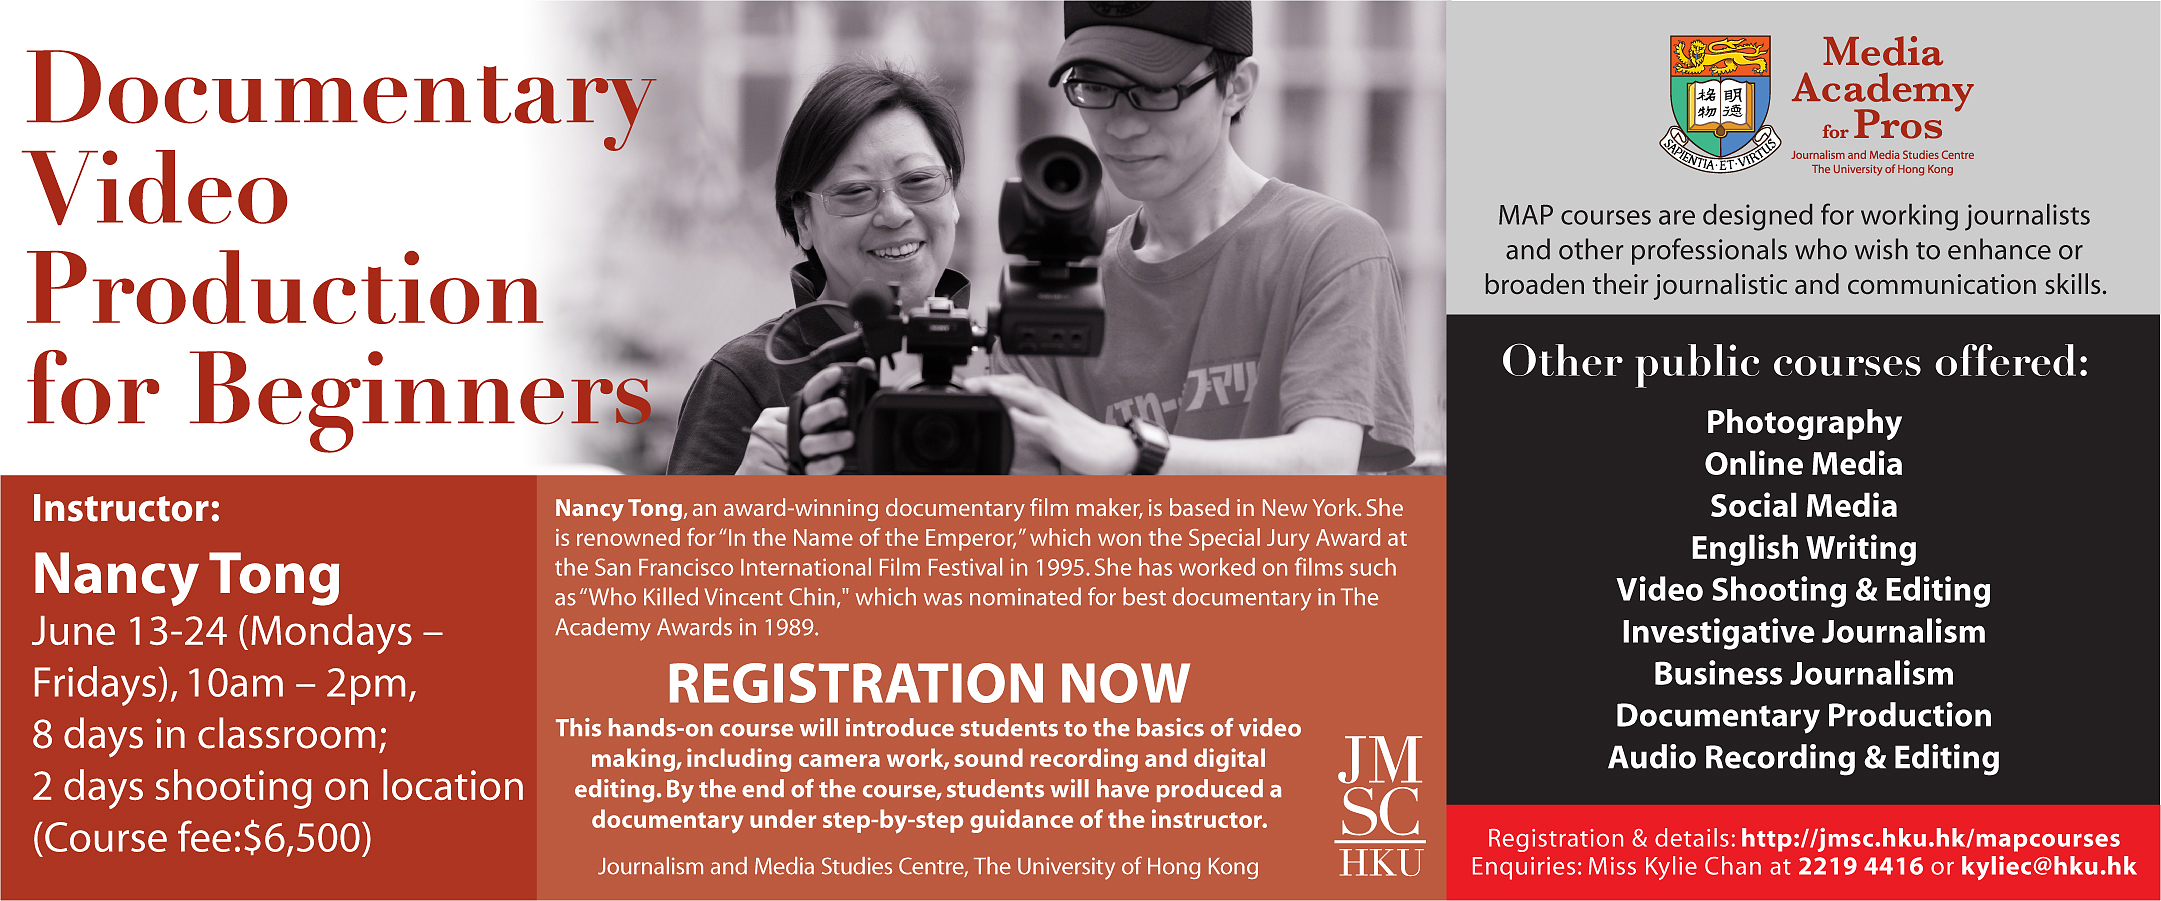 JMSC Public Course: Documentary Video Production for Beginner